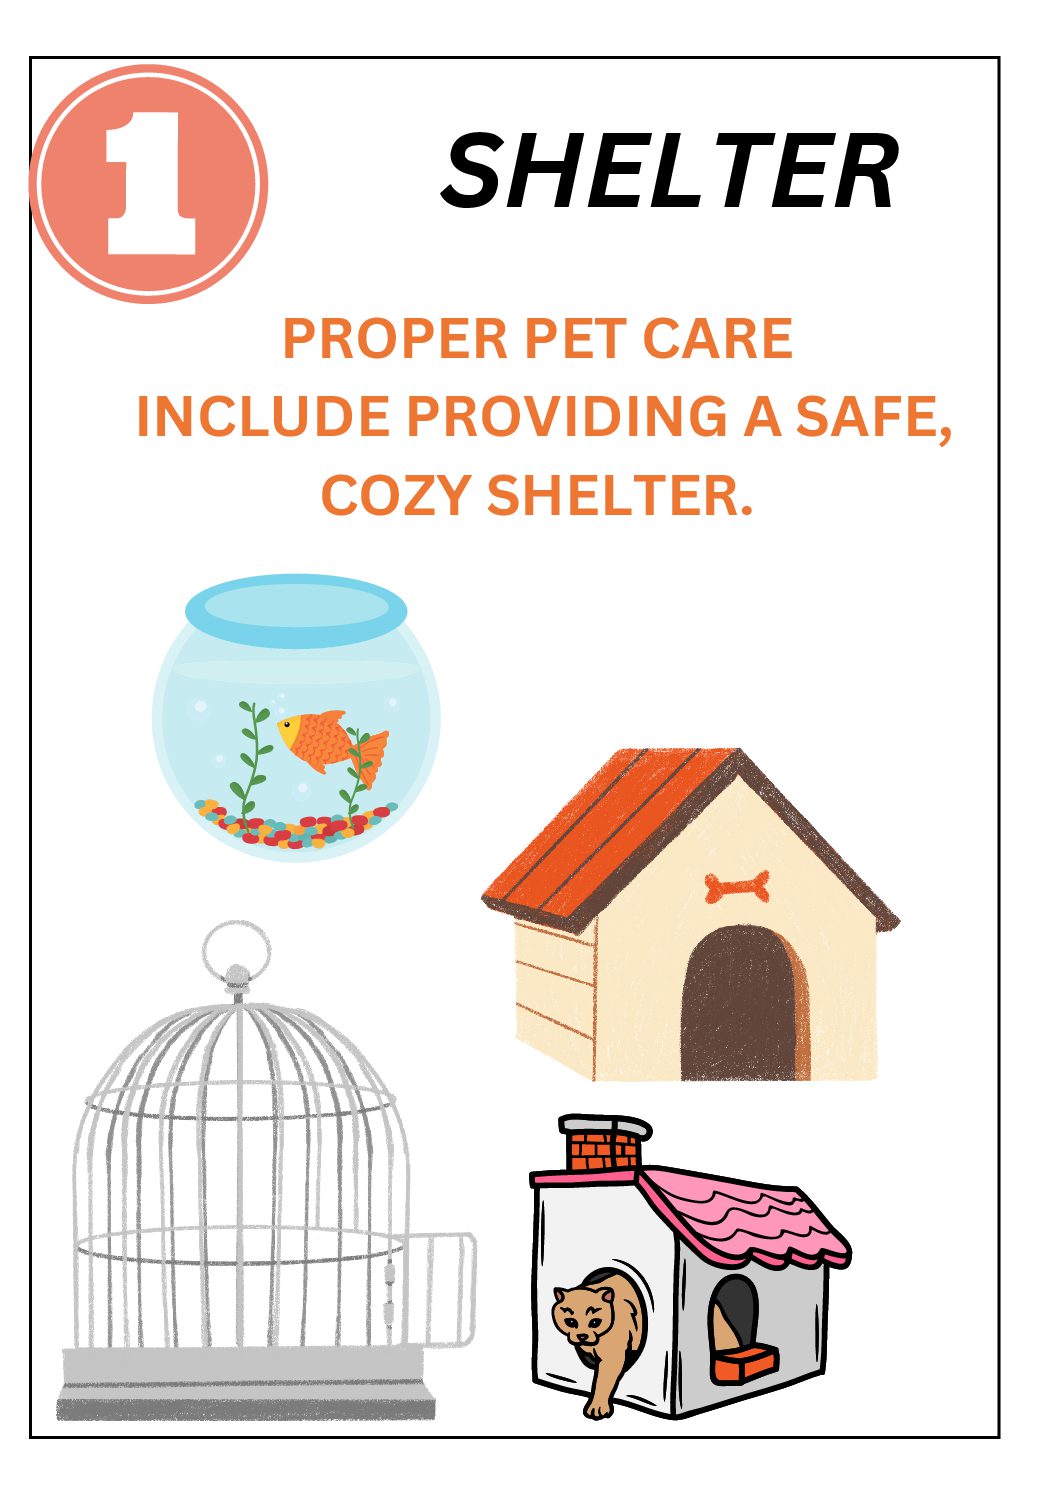 PET CARE 101: Learn How To Take Care Of Your Pets At Home, Learning Guide  For Children • Teacha!